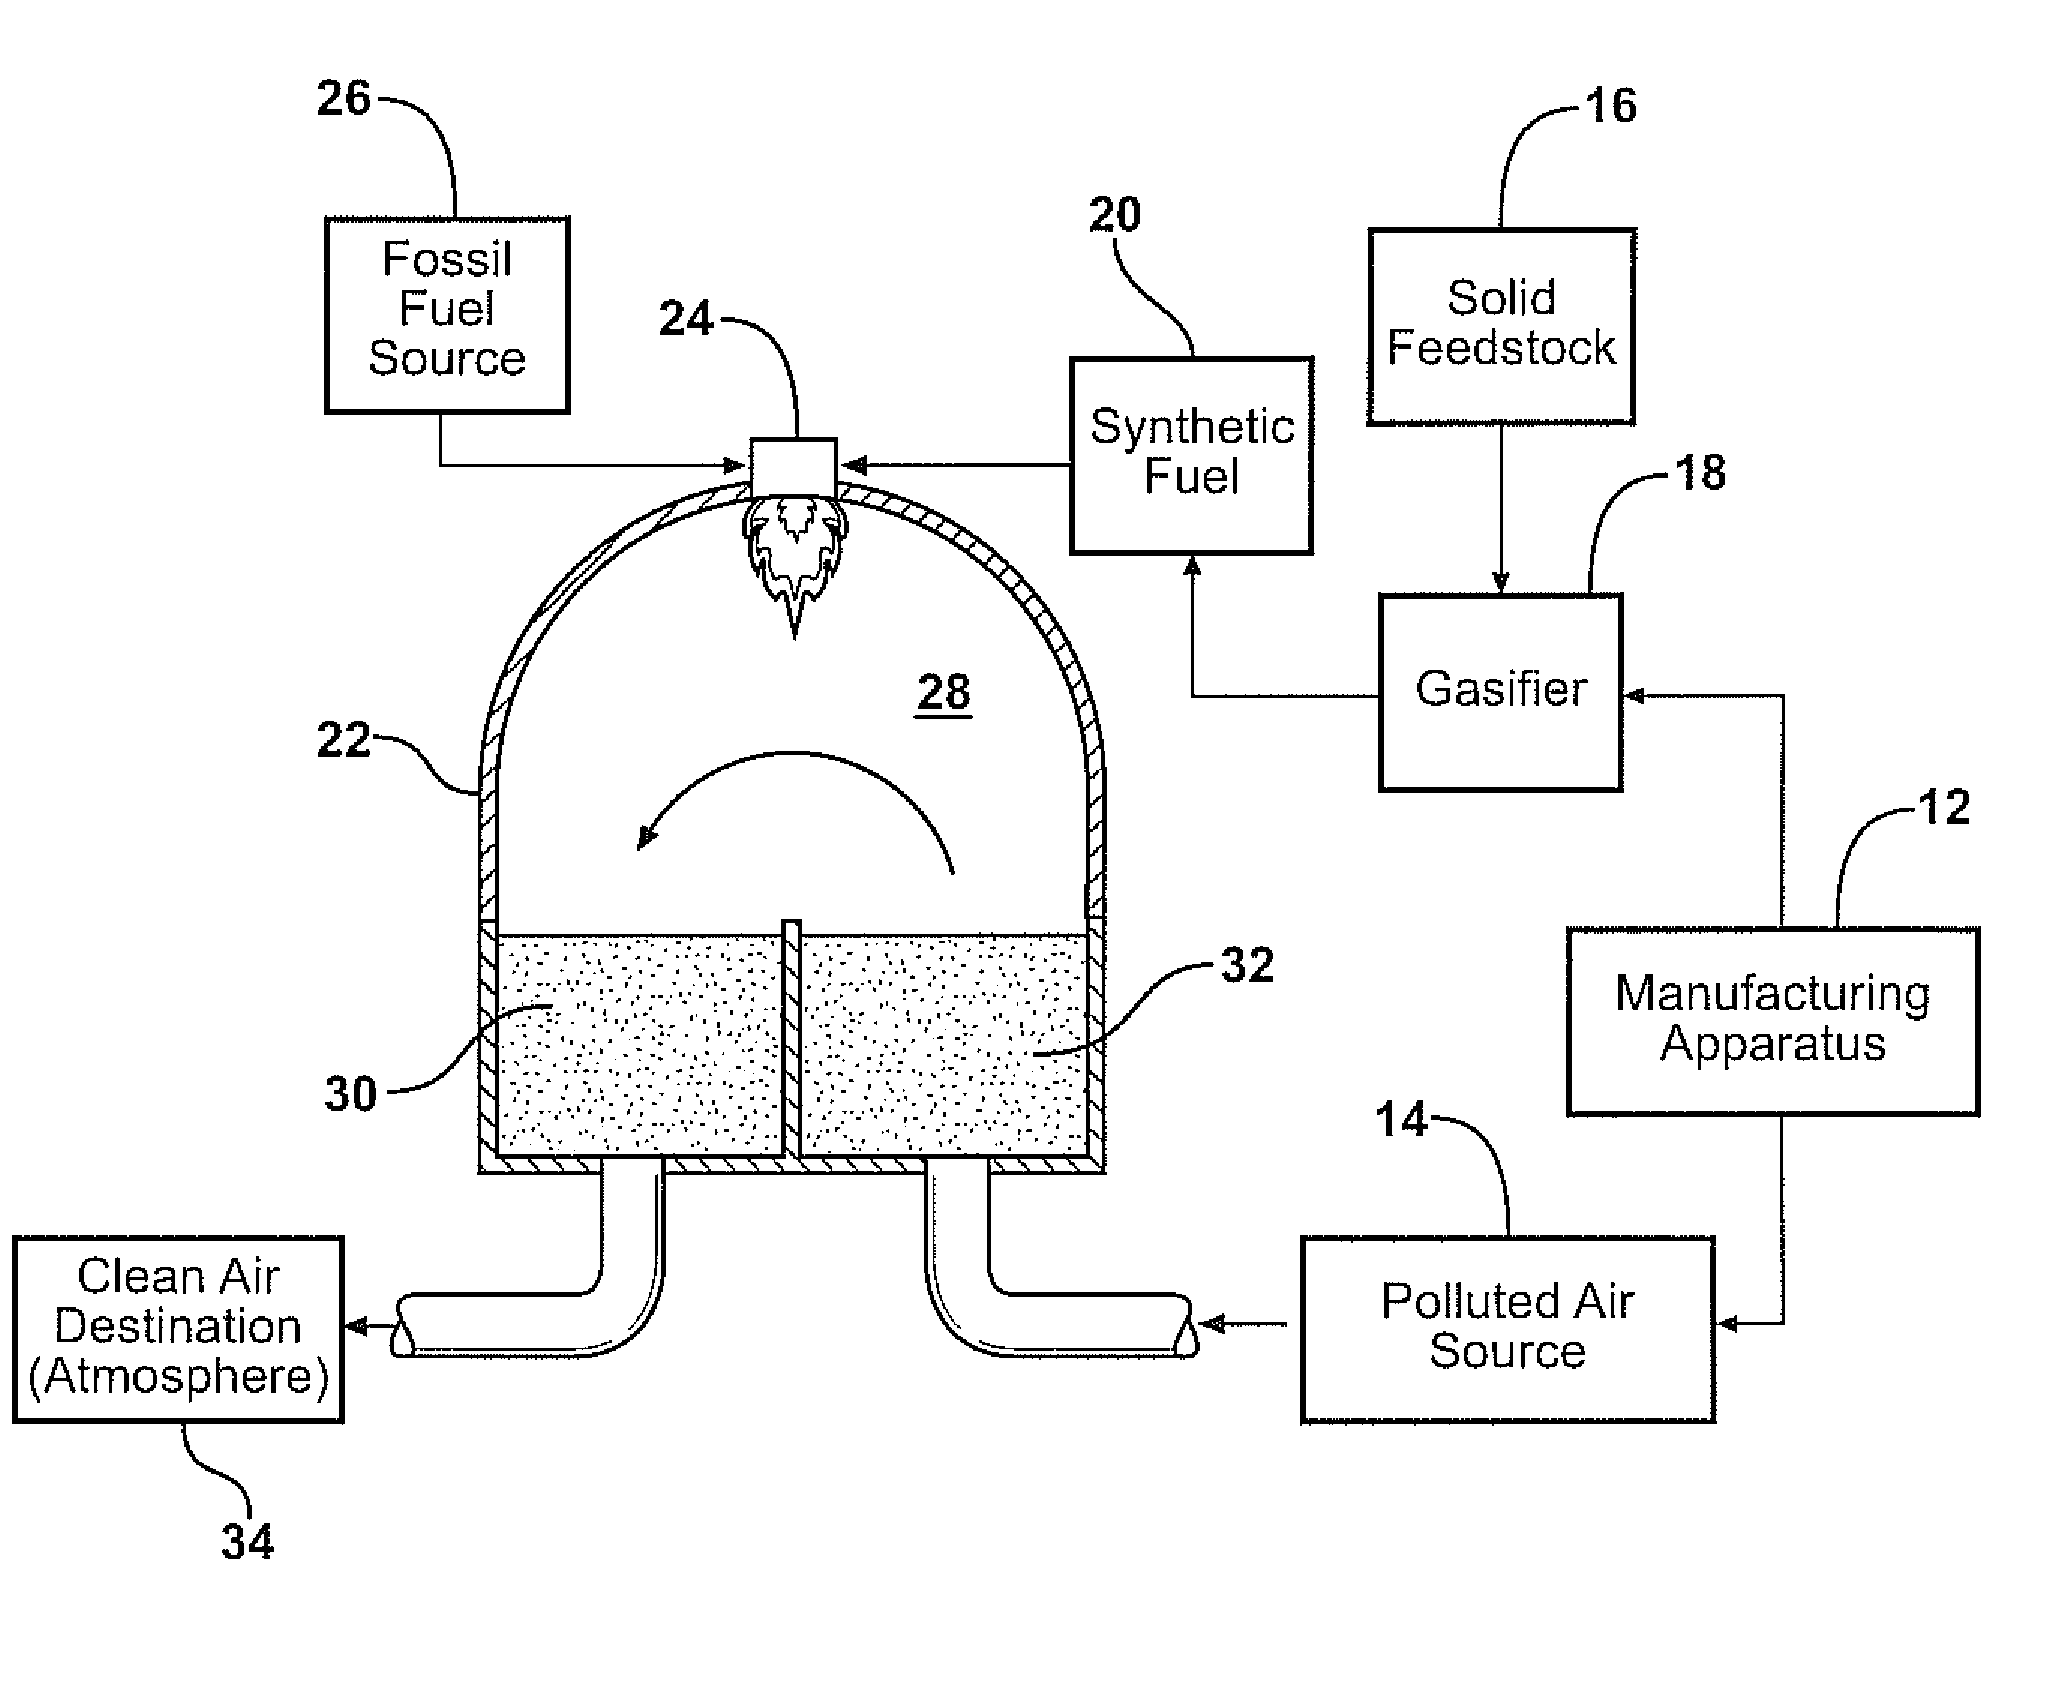 Thermal oxidizer with gasifier